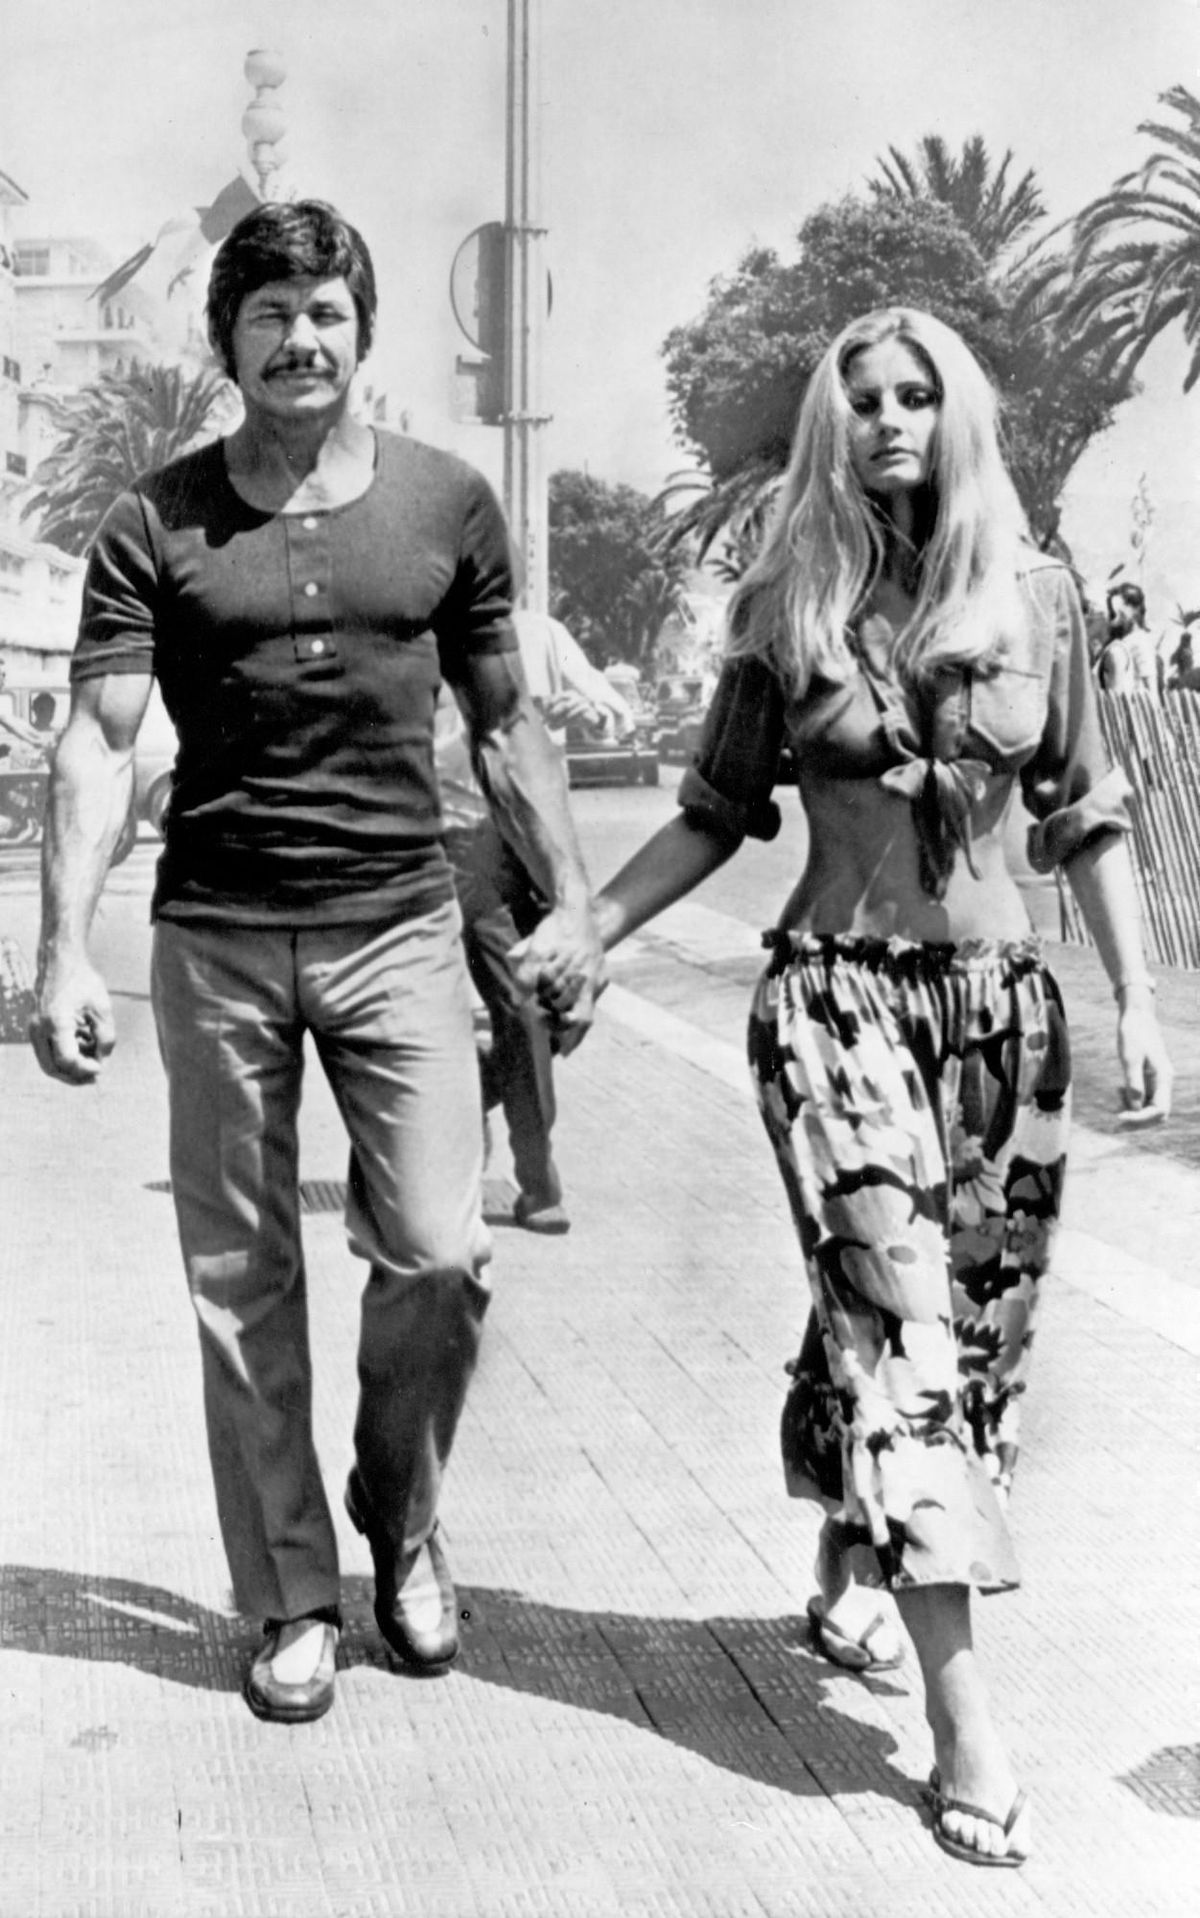 Charles Bronson with Jill Ireland in 1971